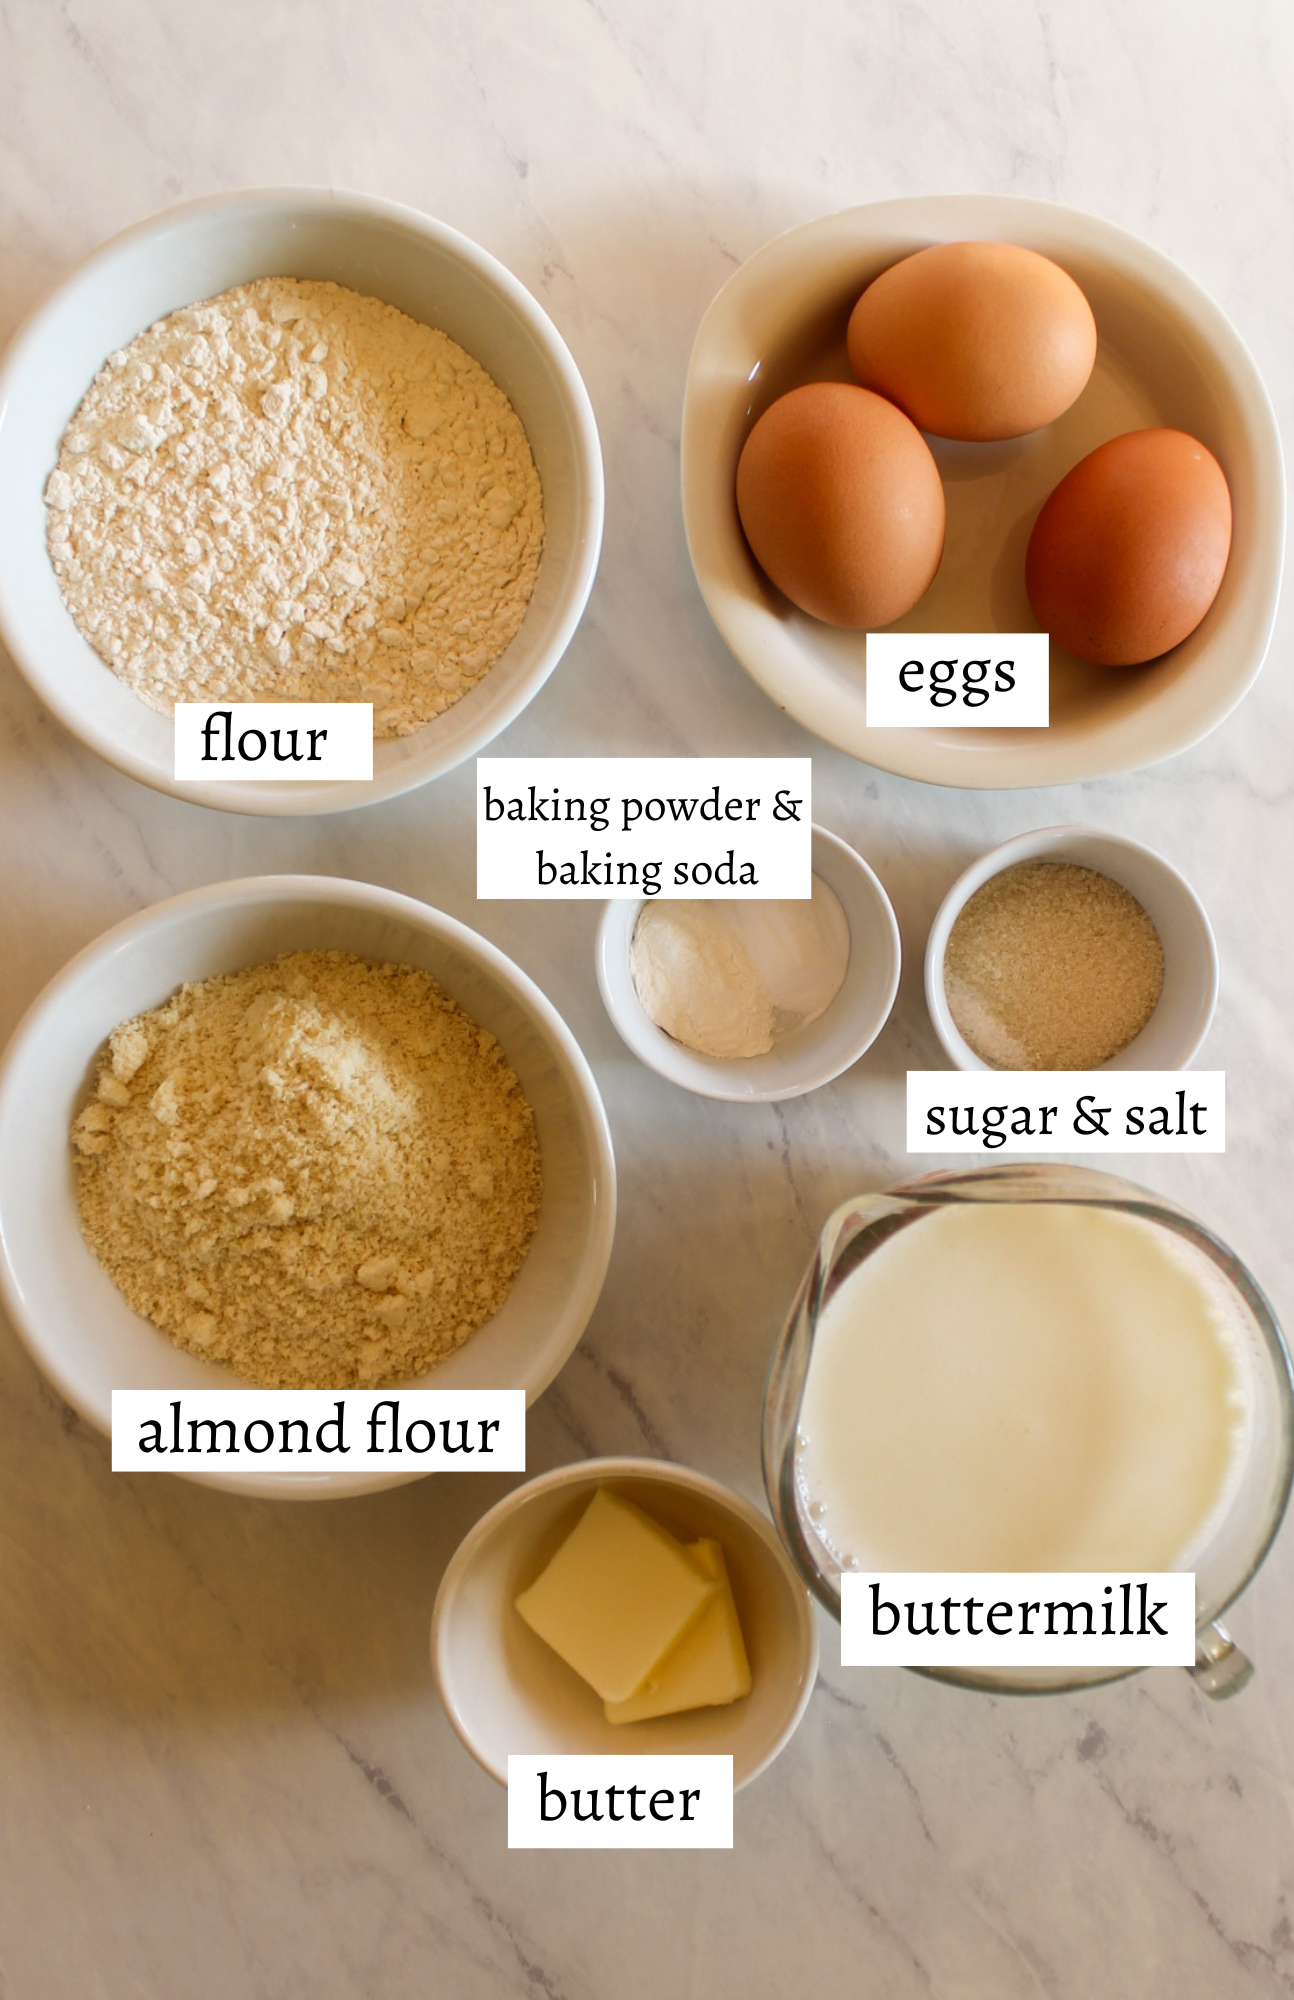 Labeled ingredients for protein buttermilk pancakes.